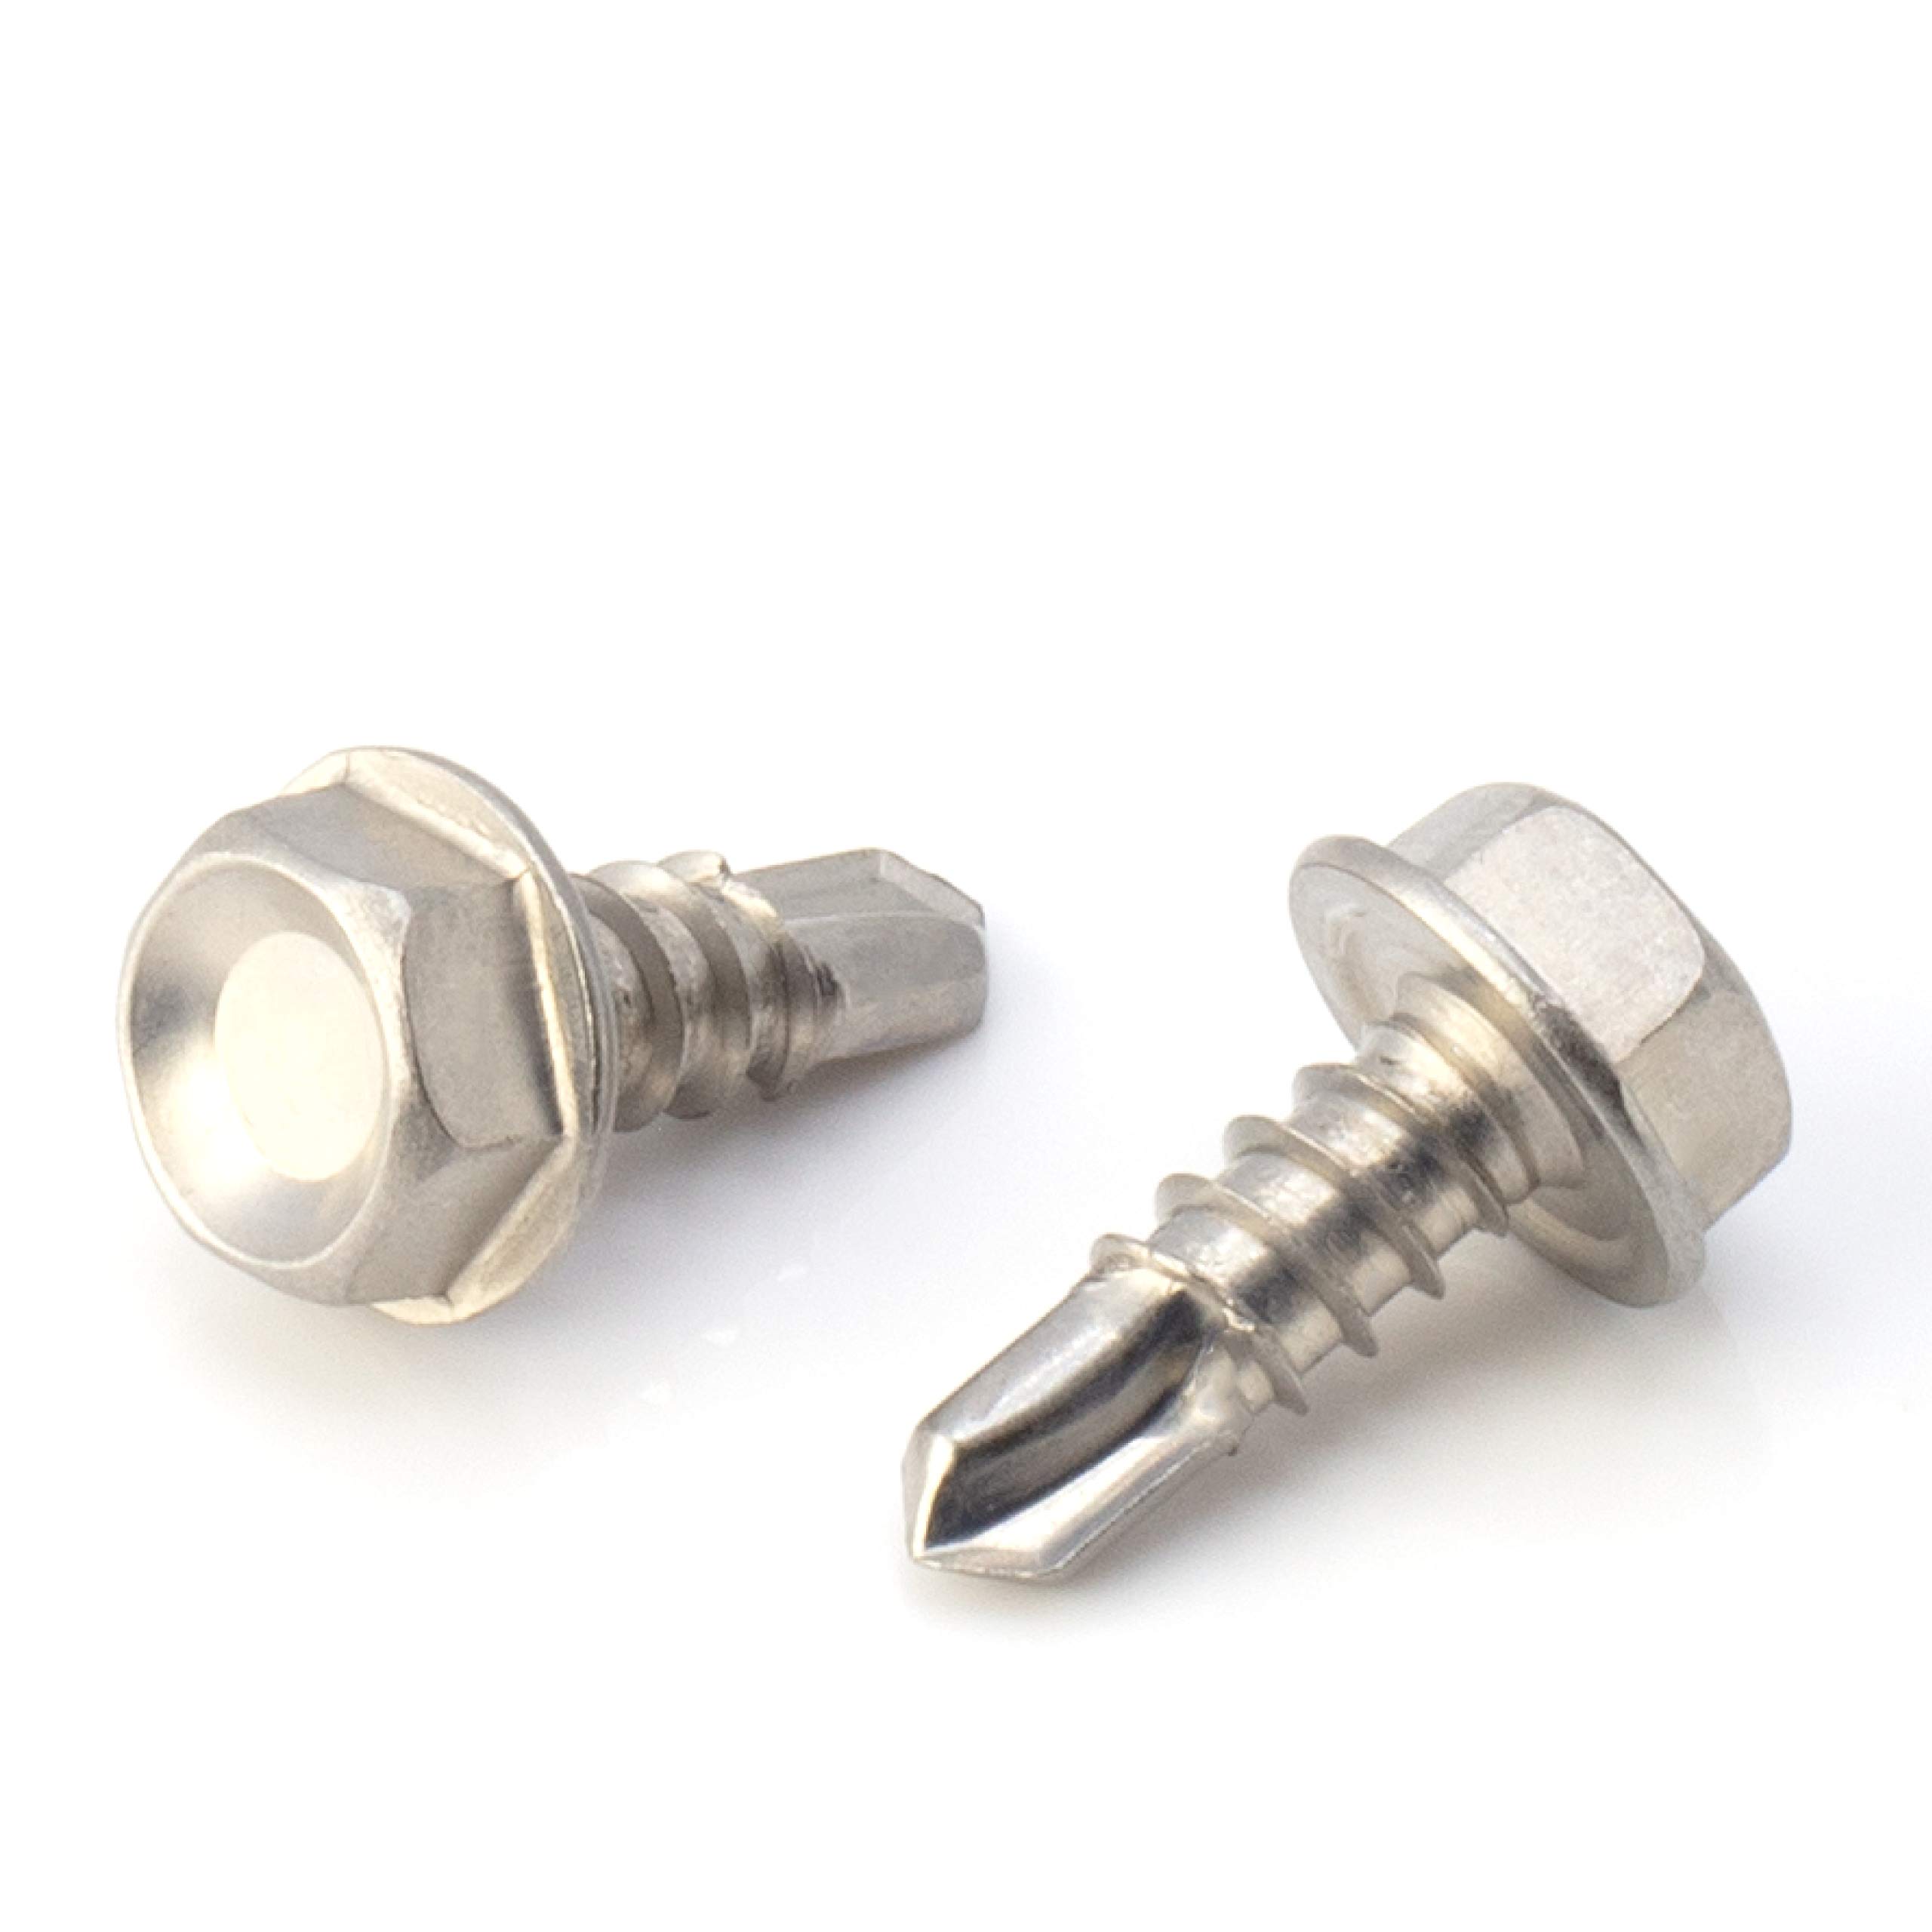 1 Length 100pcs - Self Tapping Screw - Self Drilling Screw - 410 Stainless Steel Screws = Exceptional Wear and Very Corrosion Resistant - Hex Washer Head #12 Size THE CIMPLE CO 25mm